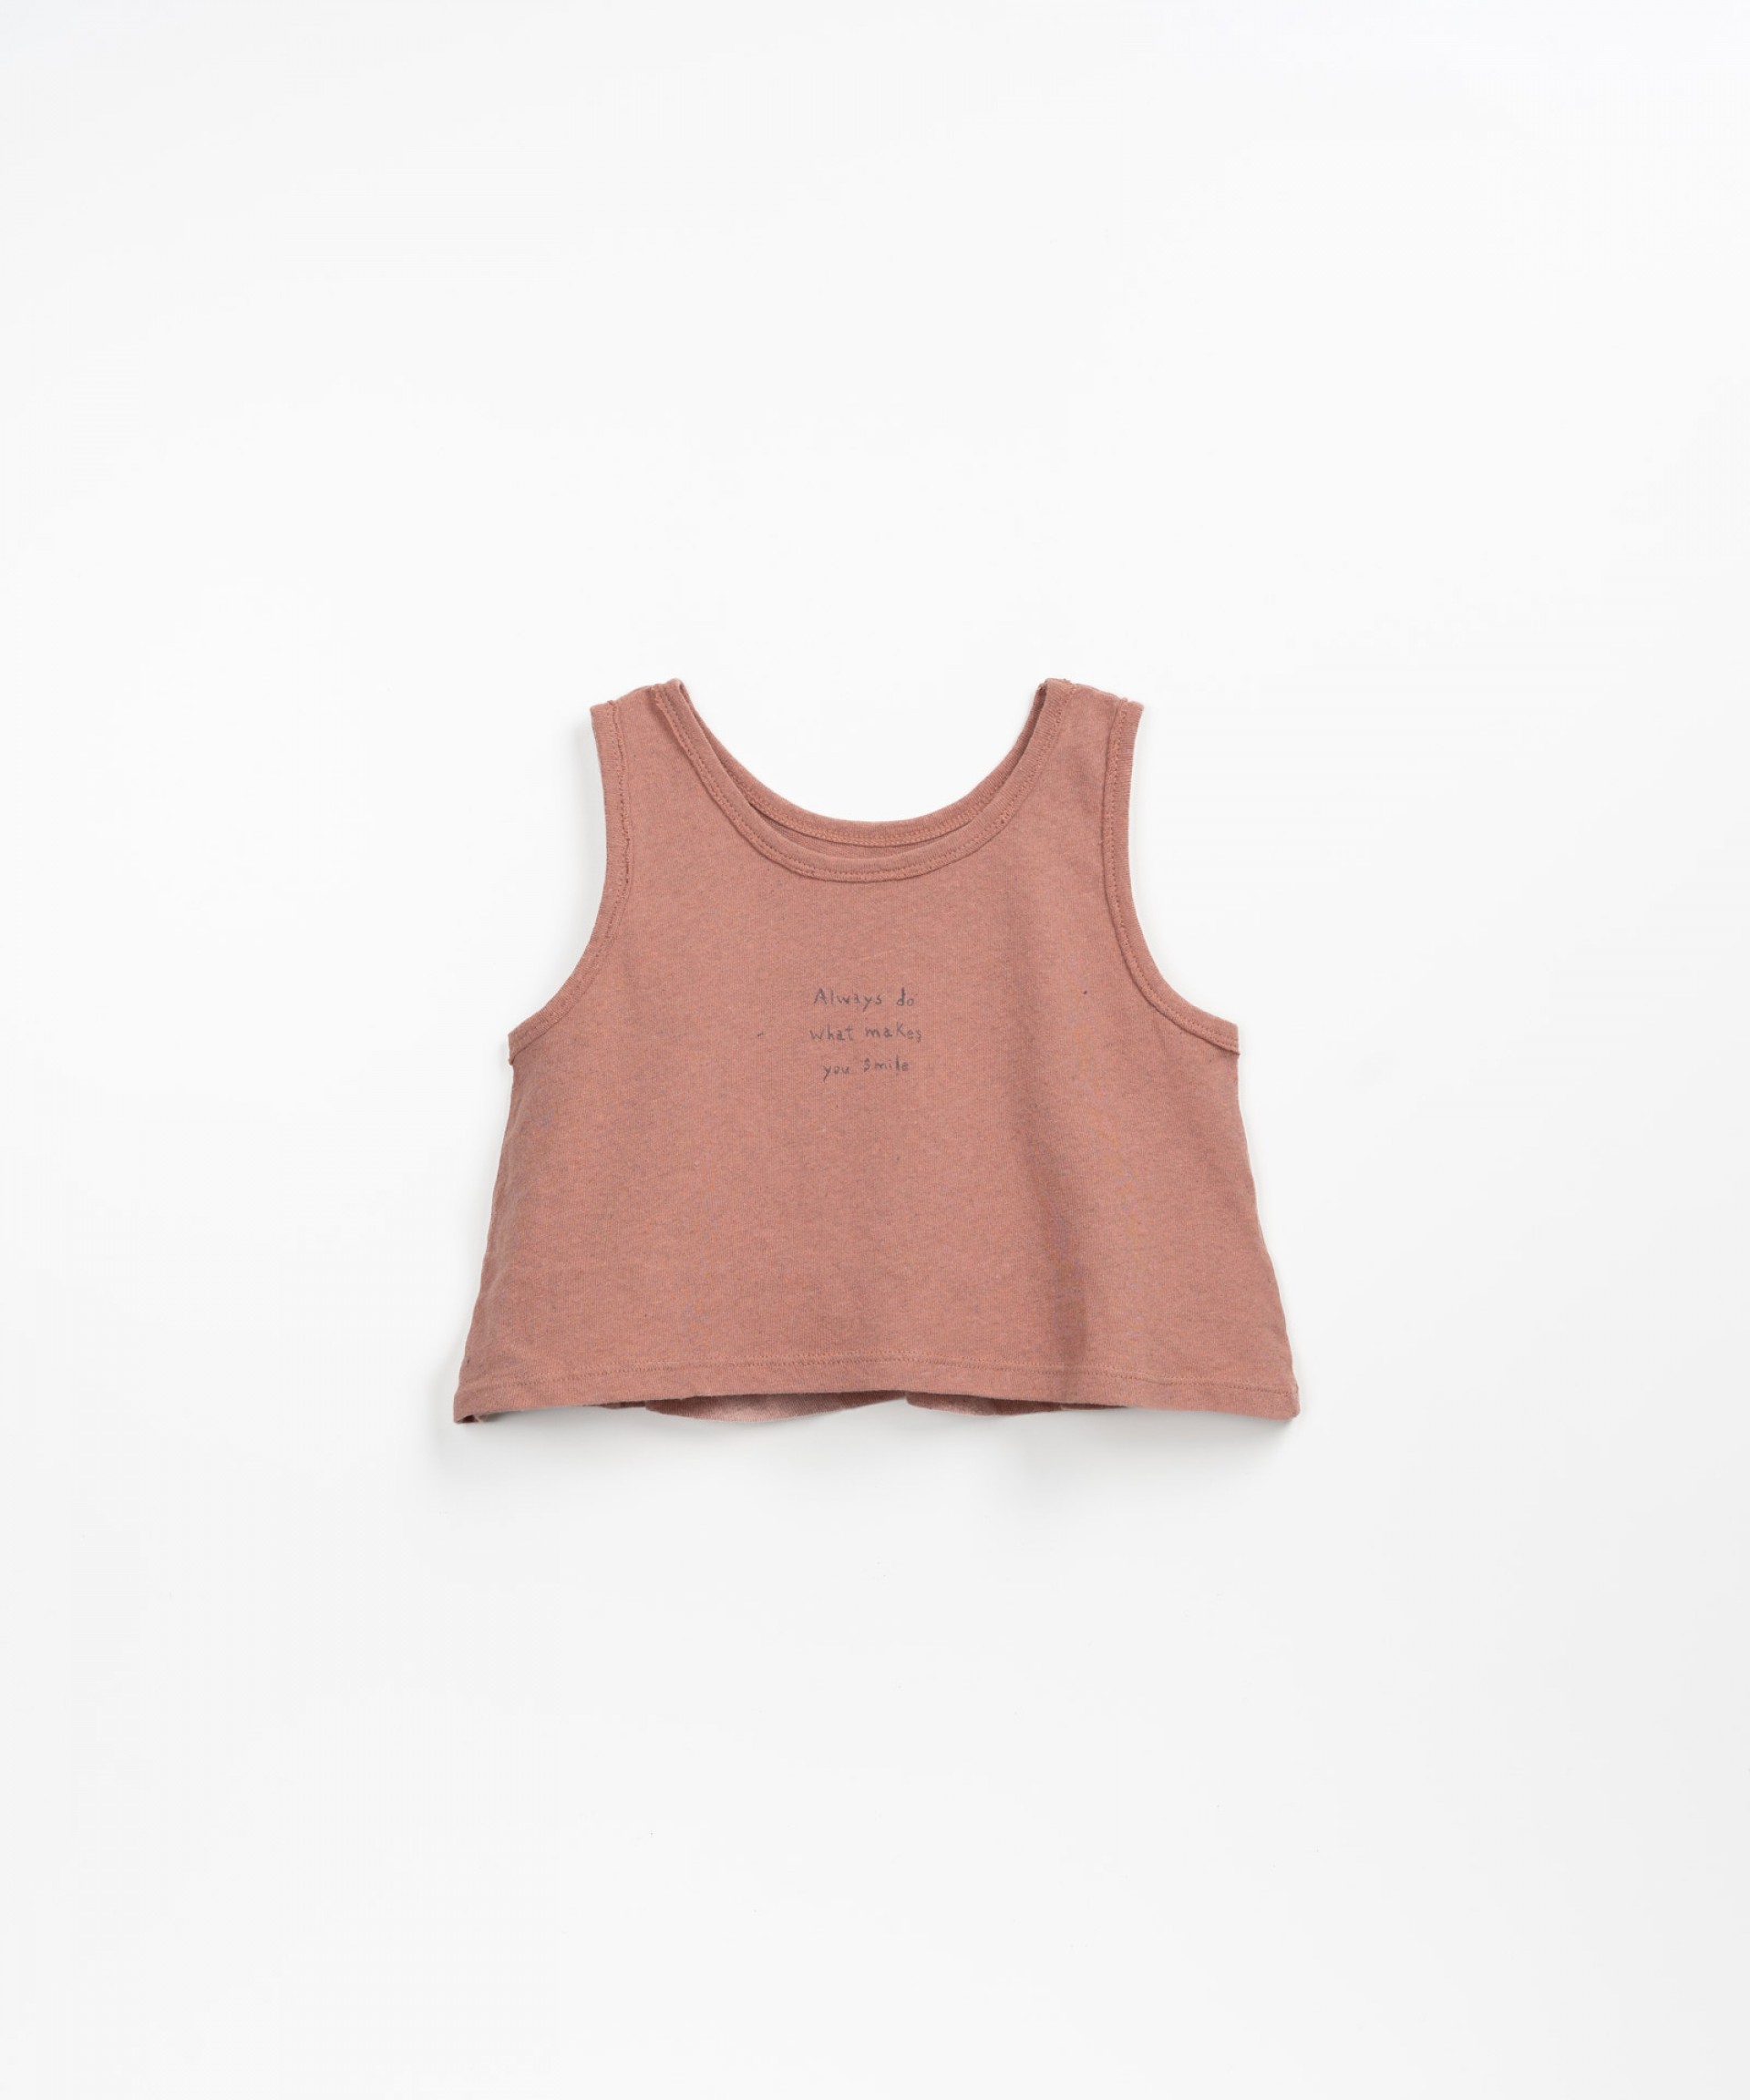 Crop top with lettering on the front | Textile Art